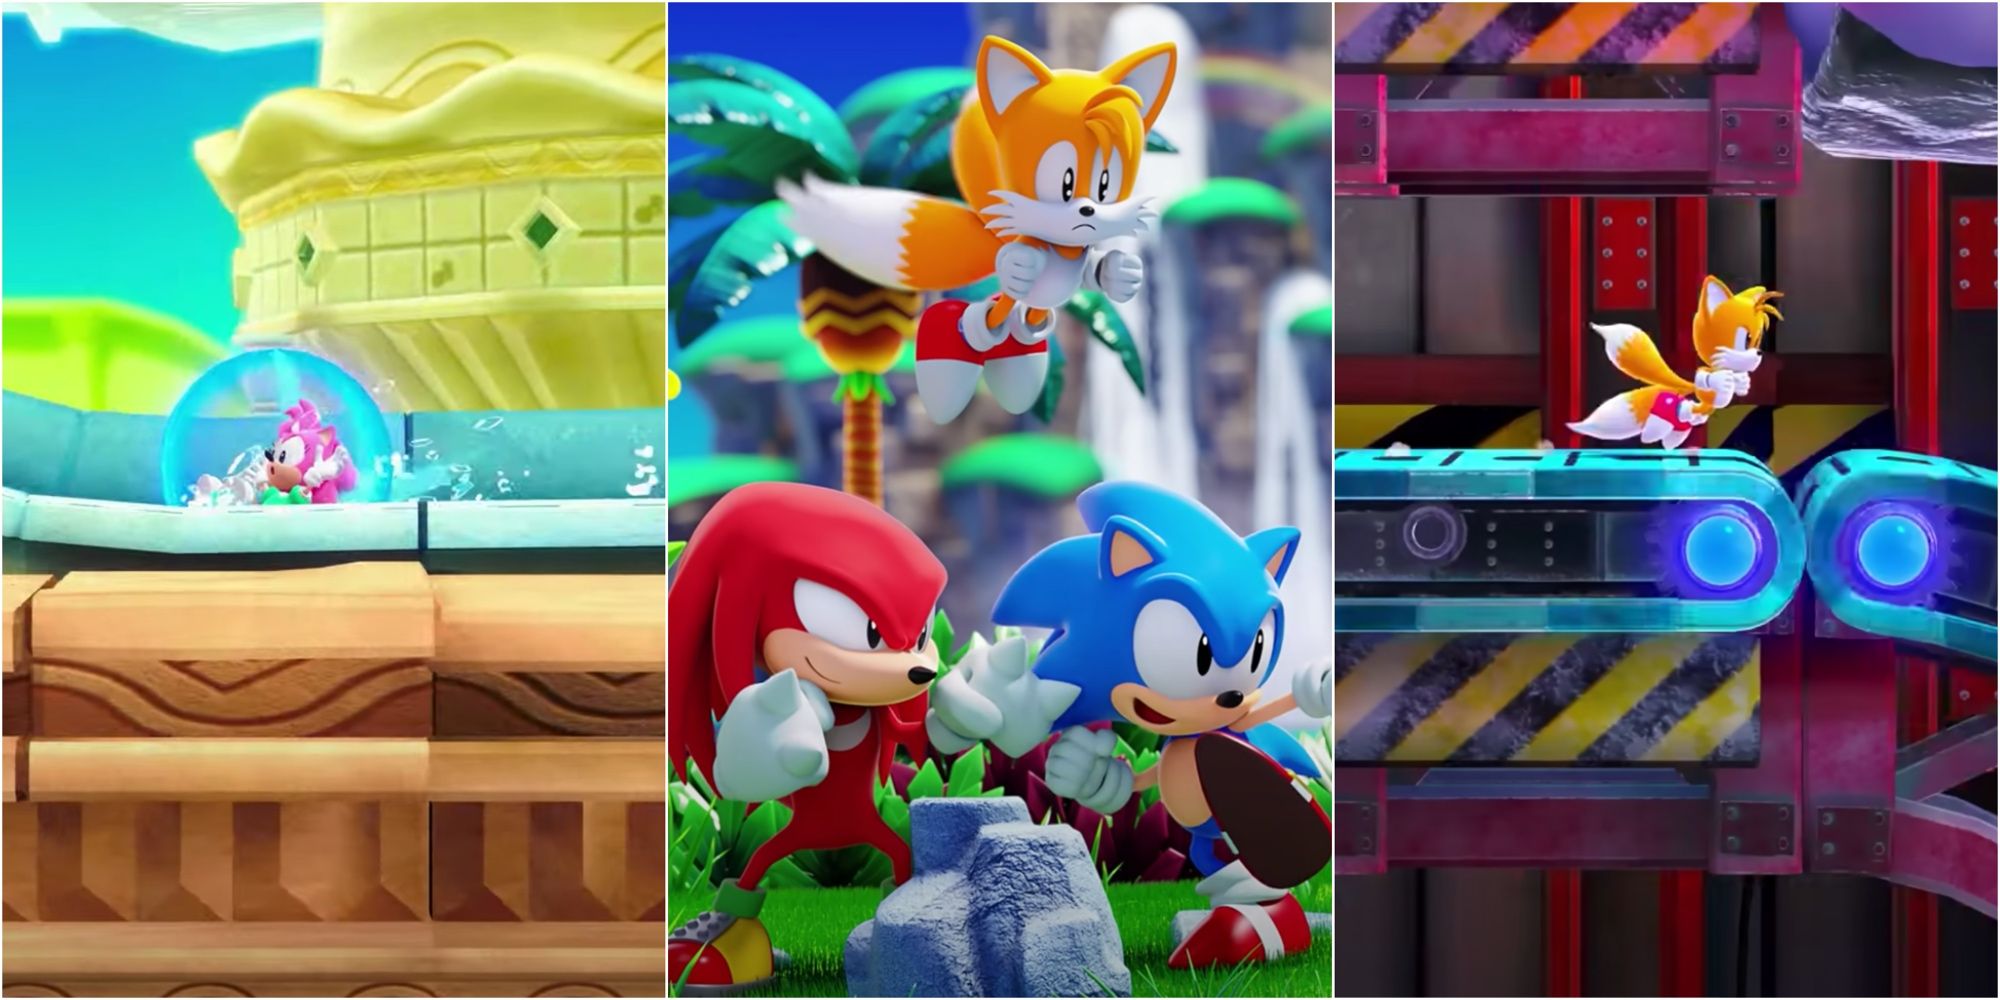 Amy, Sonic, Tails, And Knuckles in Sonic Superstars